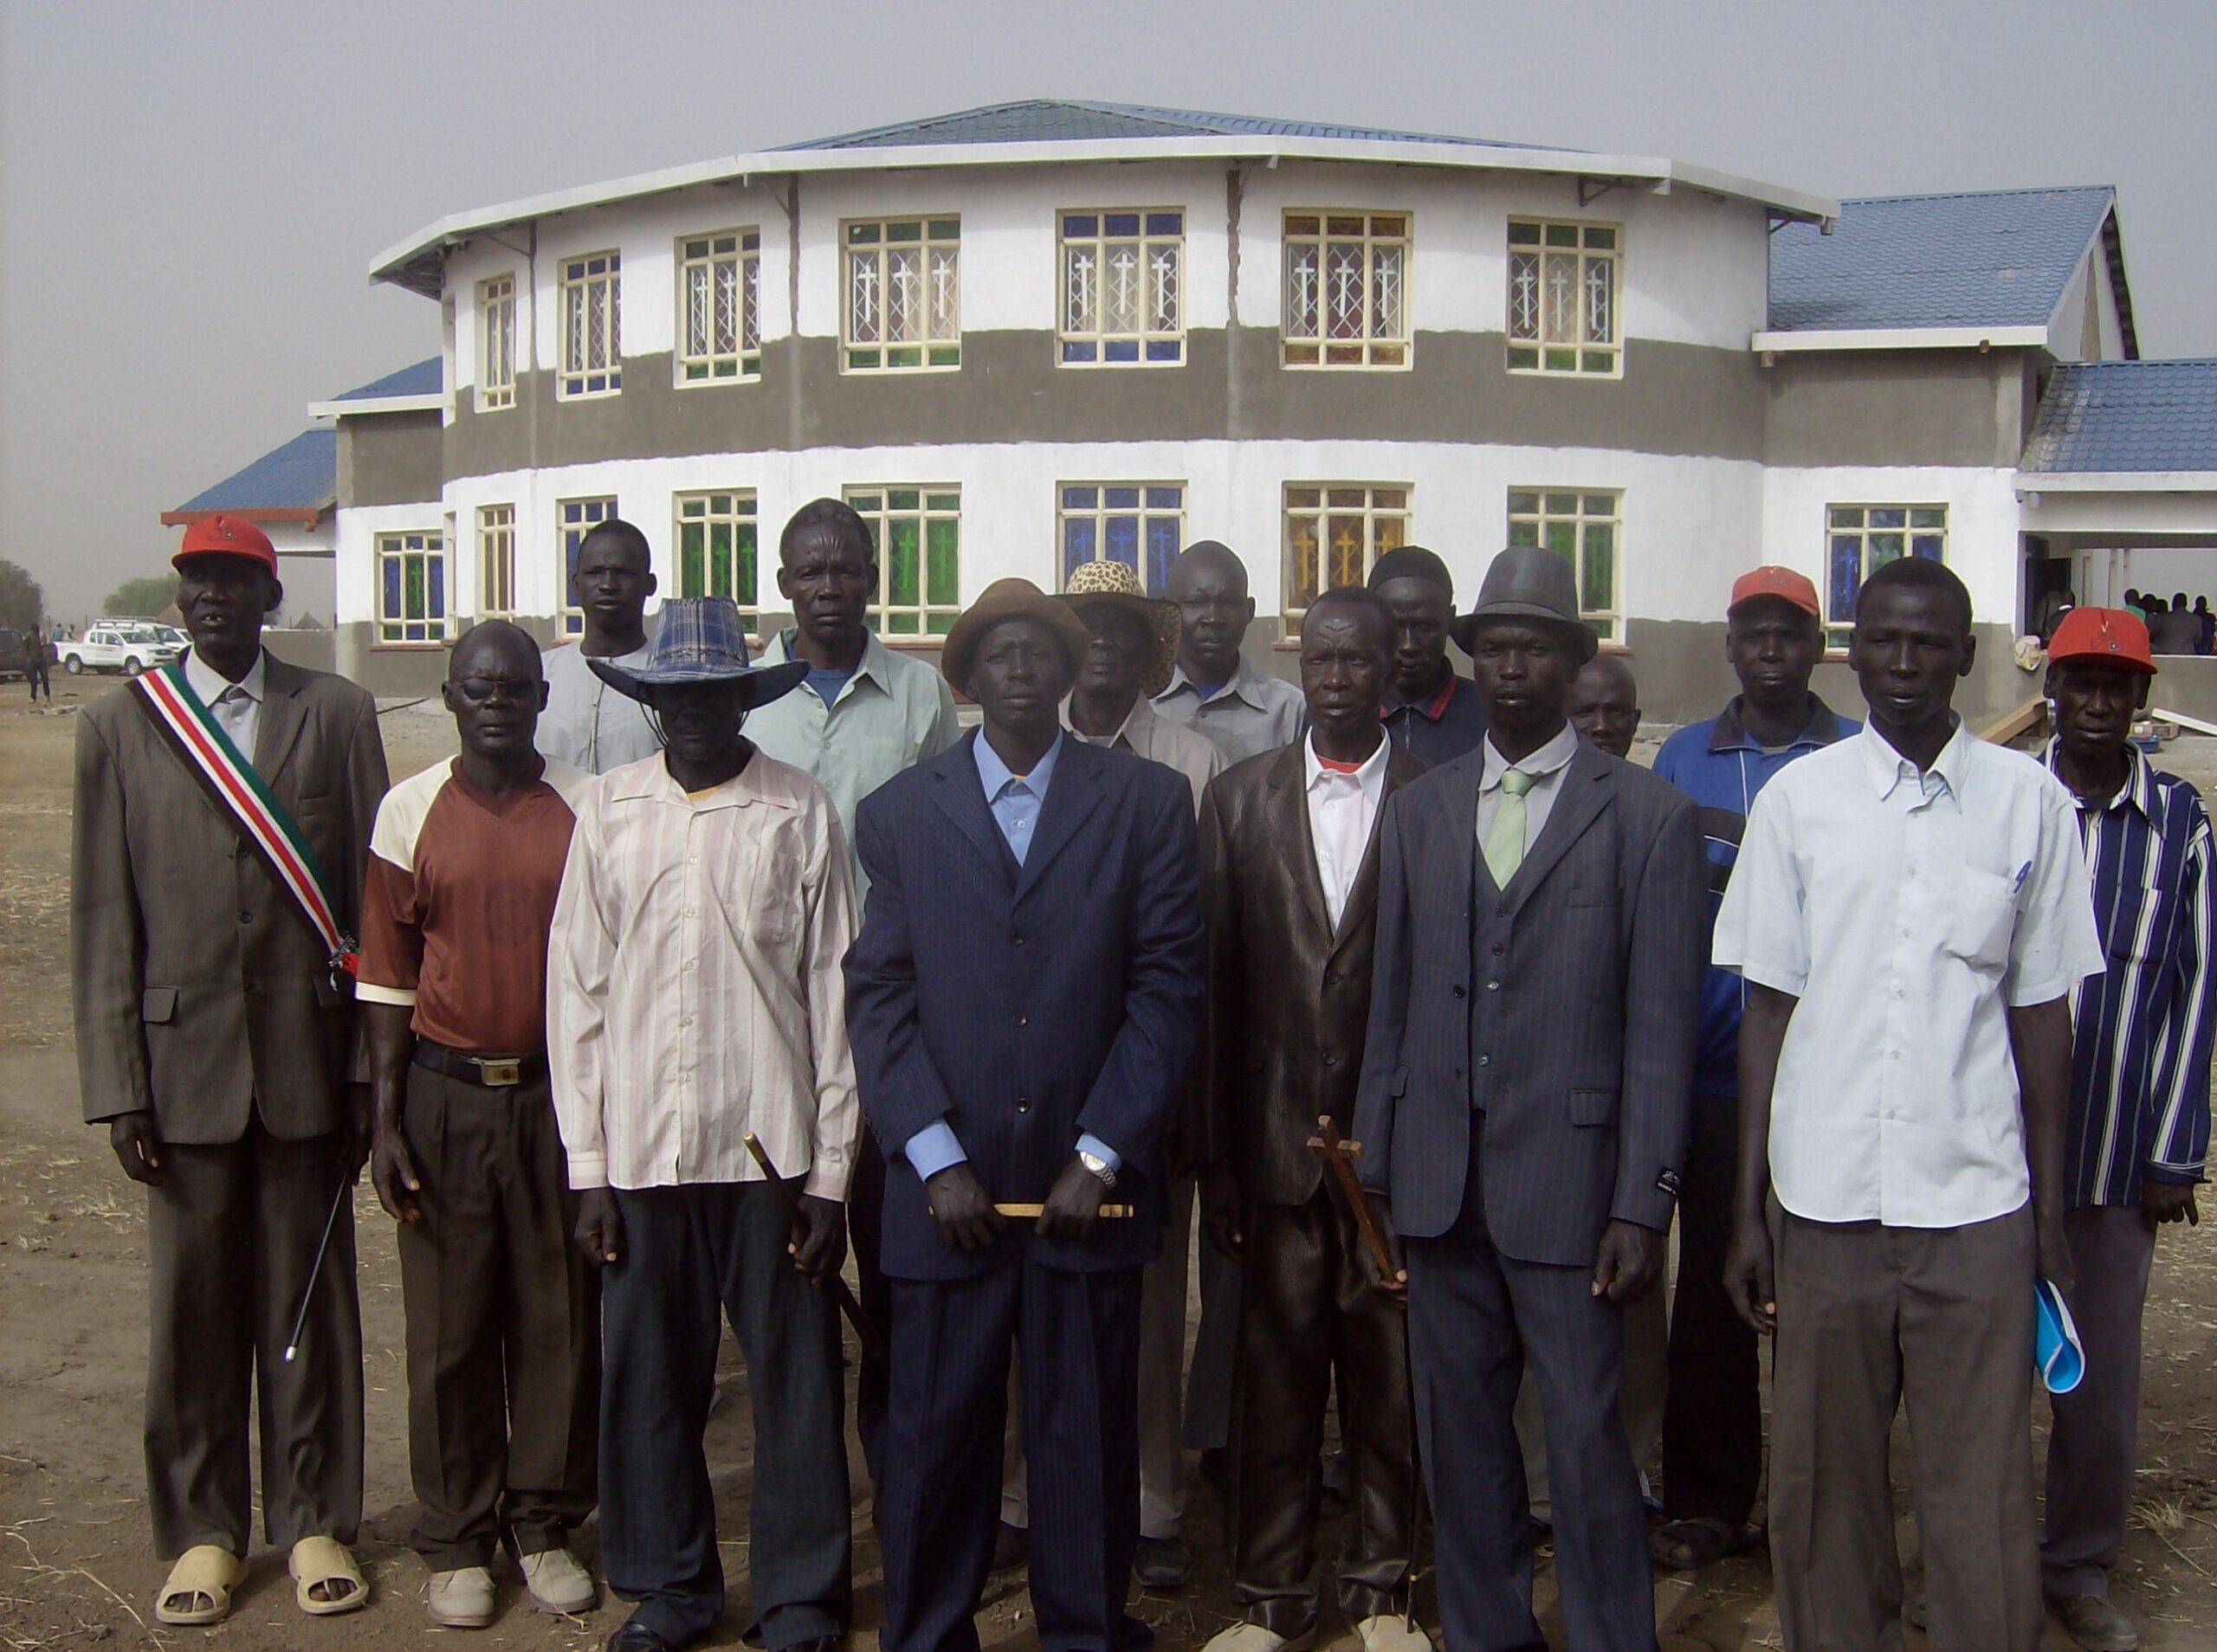 Group of chiefs standing in front of the church at Makol Cuei village in Jonglei State, South Sudan. March 19, 2012 (ST)